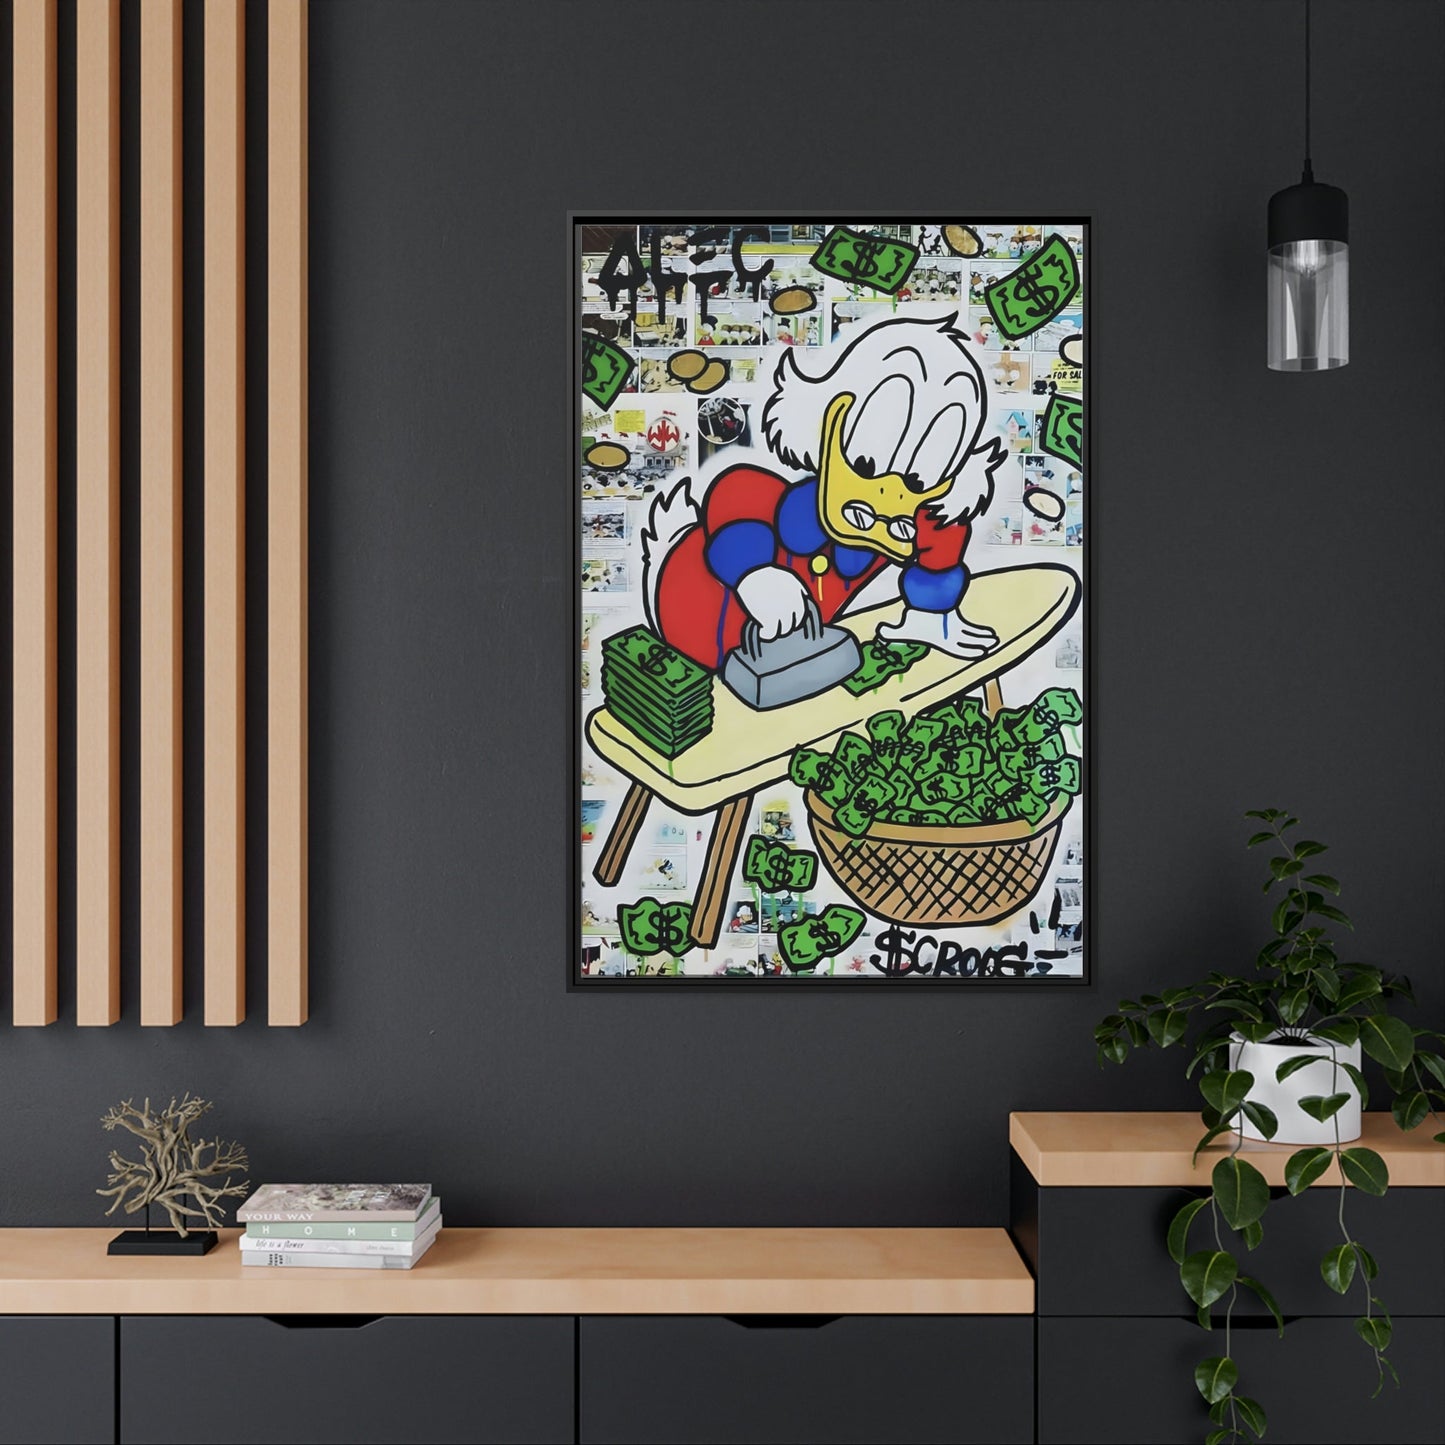 The Money Duck: Wall Art Prints of a Duck in Alec Monopoly's Iconic Money-Themed Graffiti Style on Framed Canvas